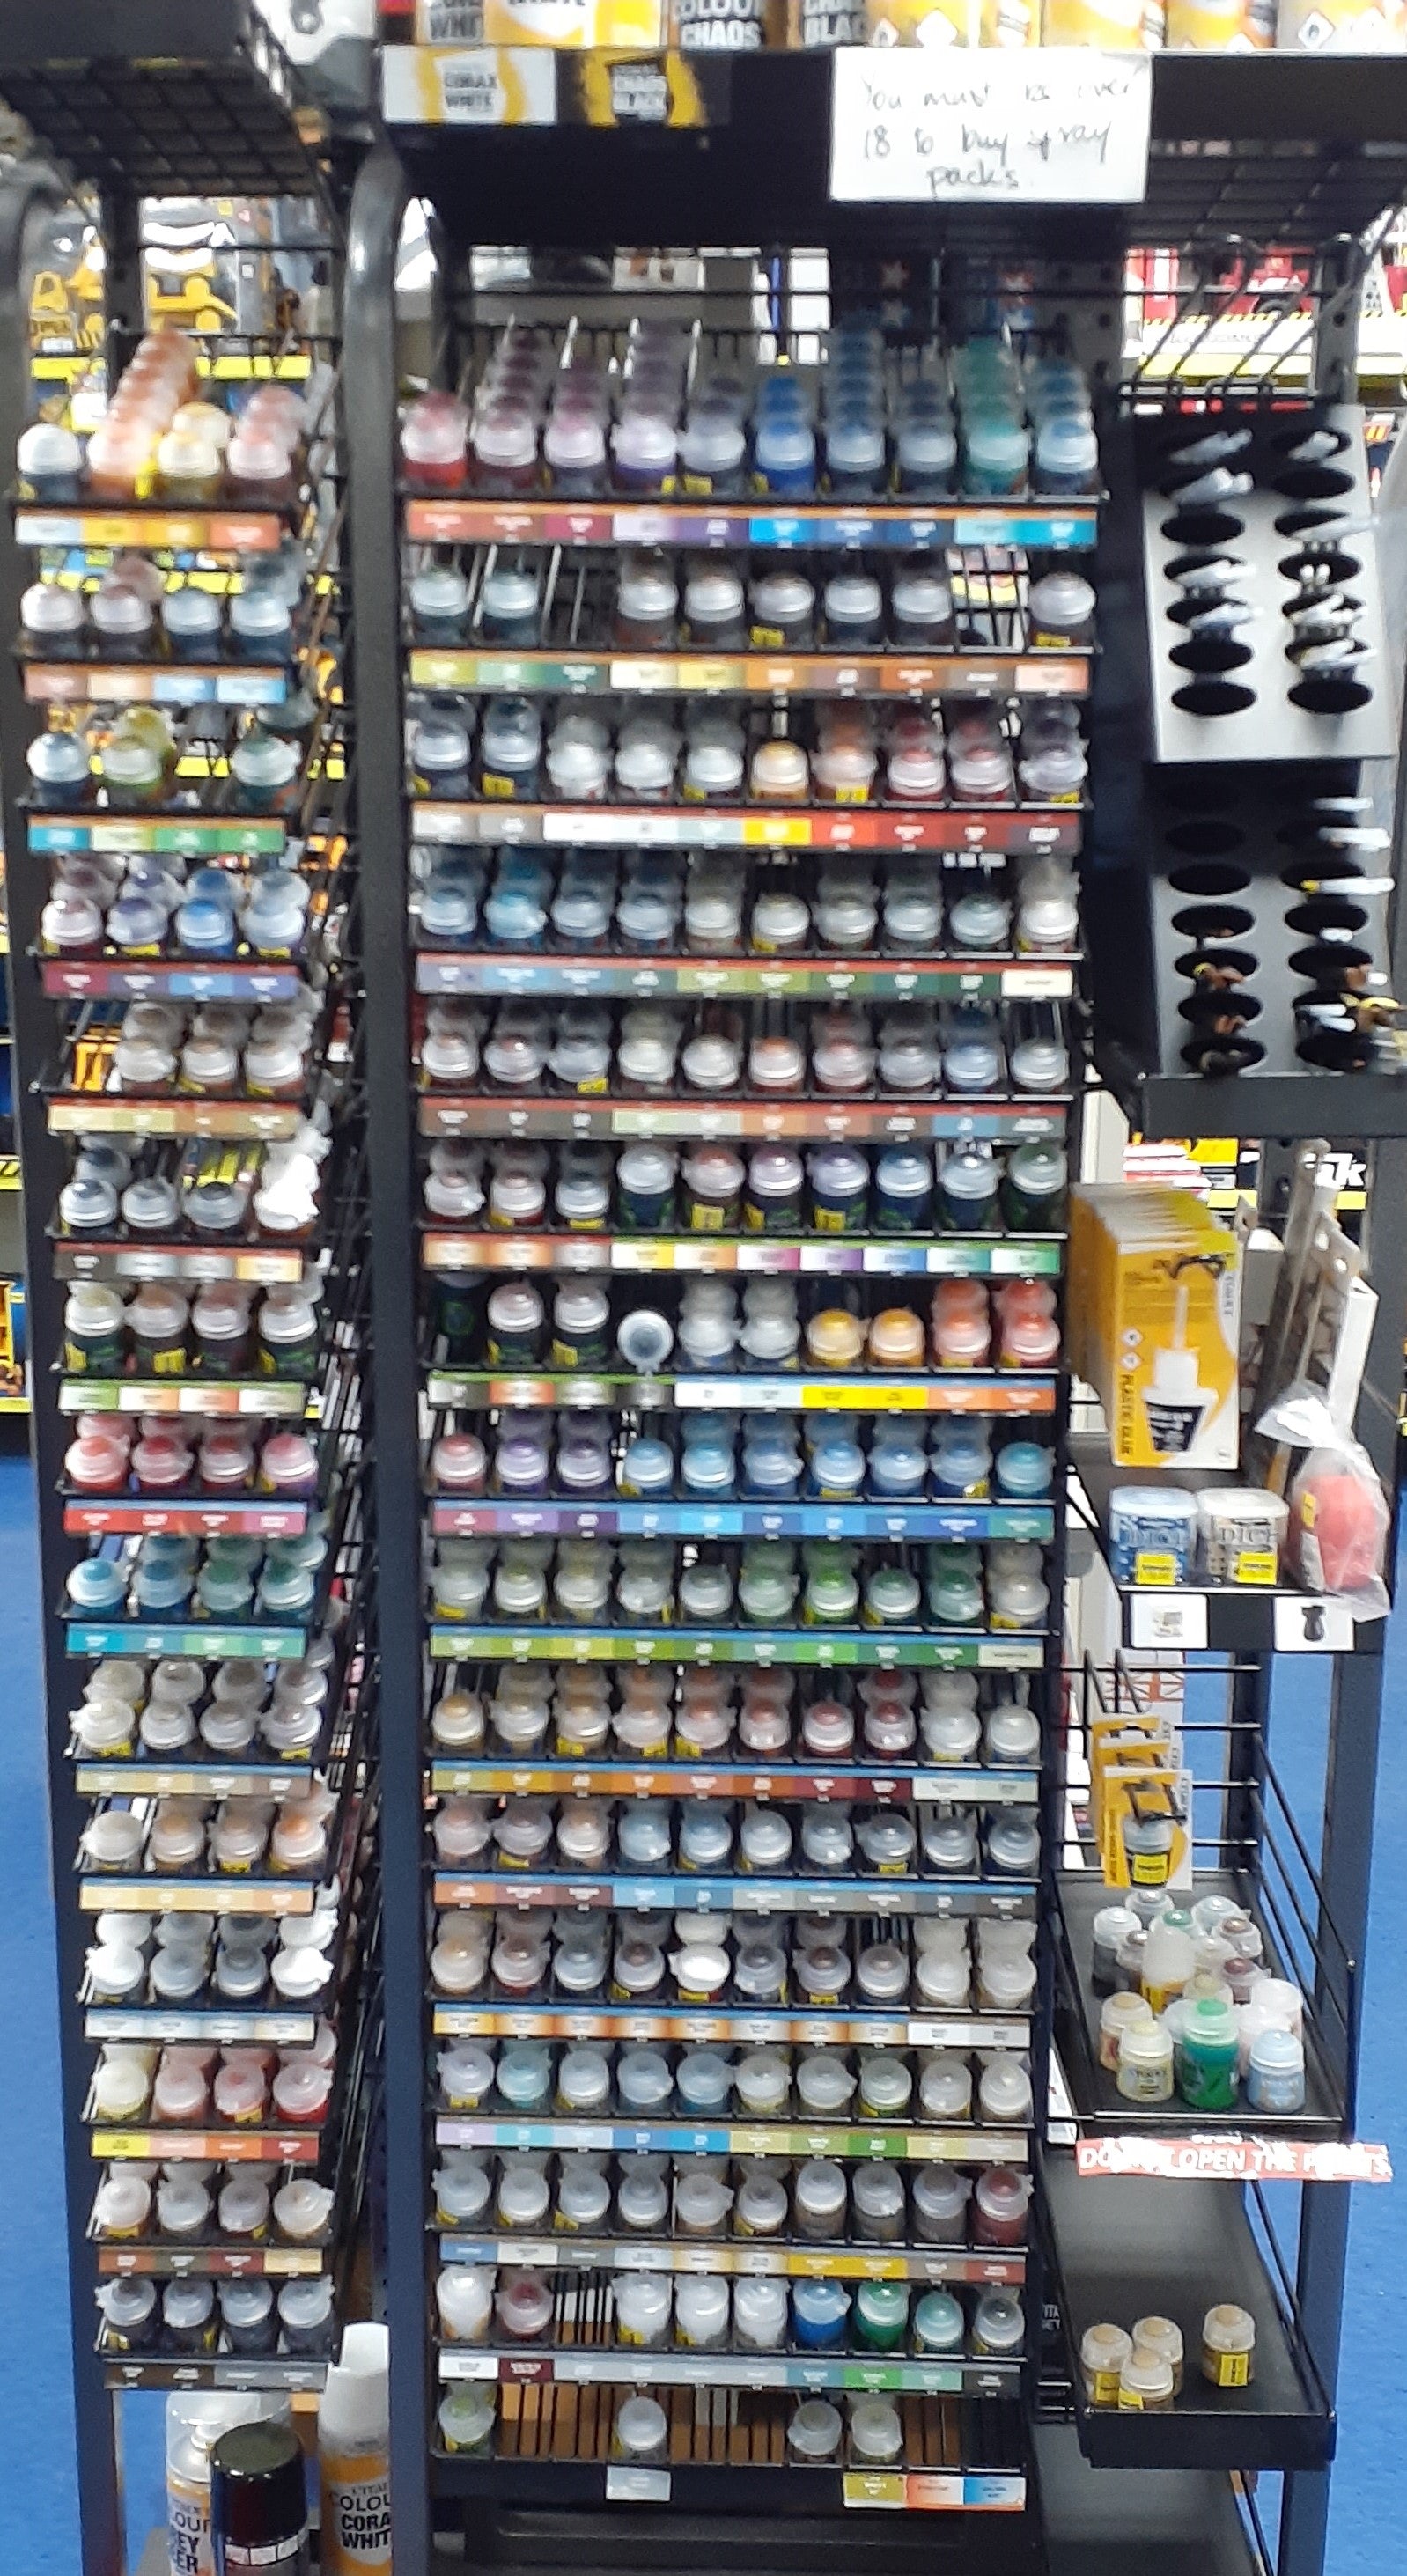 Warhammer large range of models, Paints & Accessories in stock